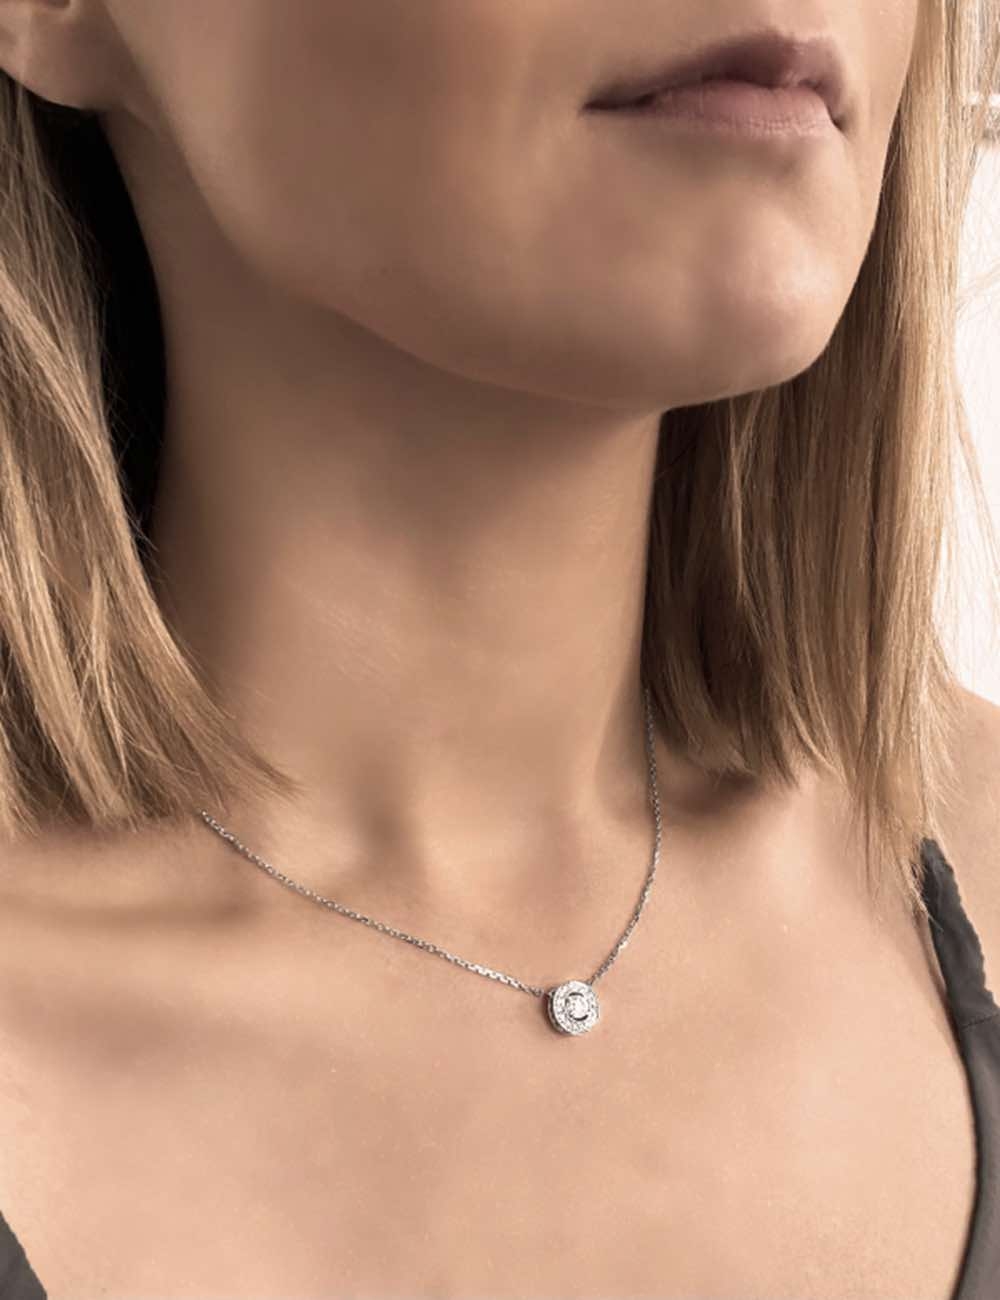 Luxury 0.40ct white diamond necklace, radiant halo, ethical. Timeless elegance and refinement.